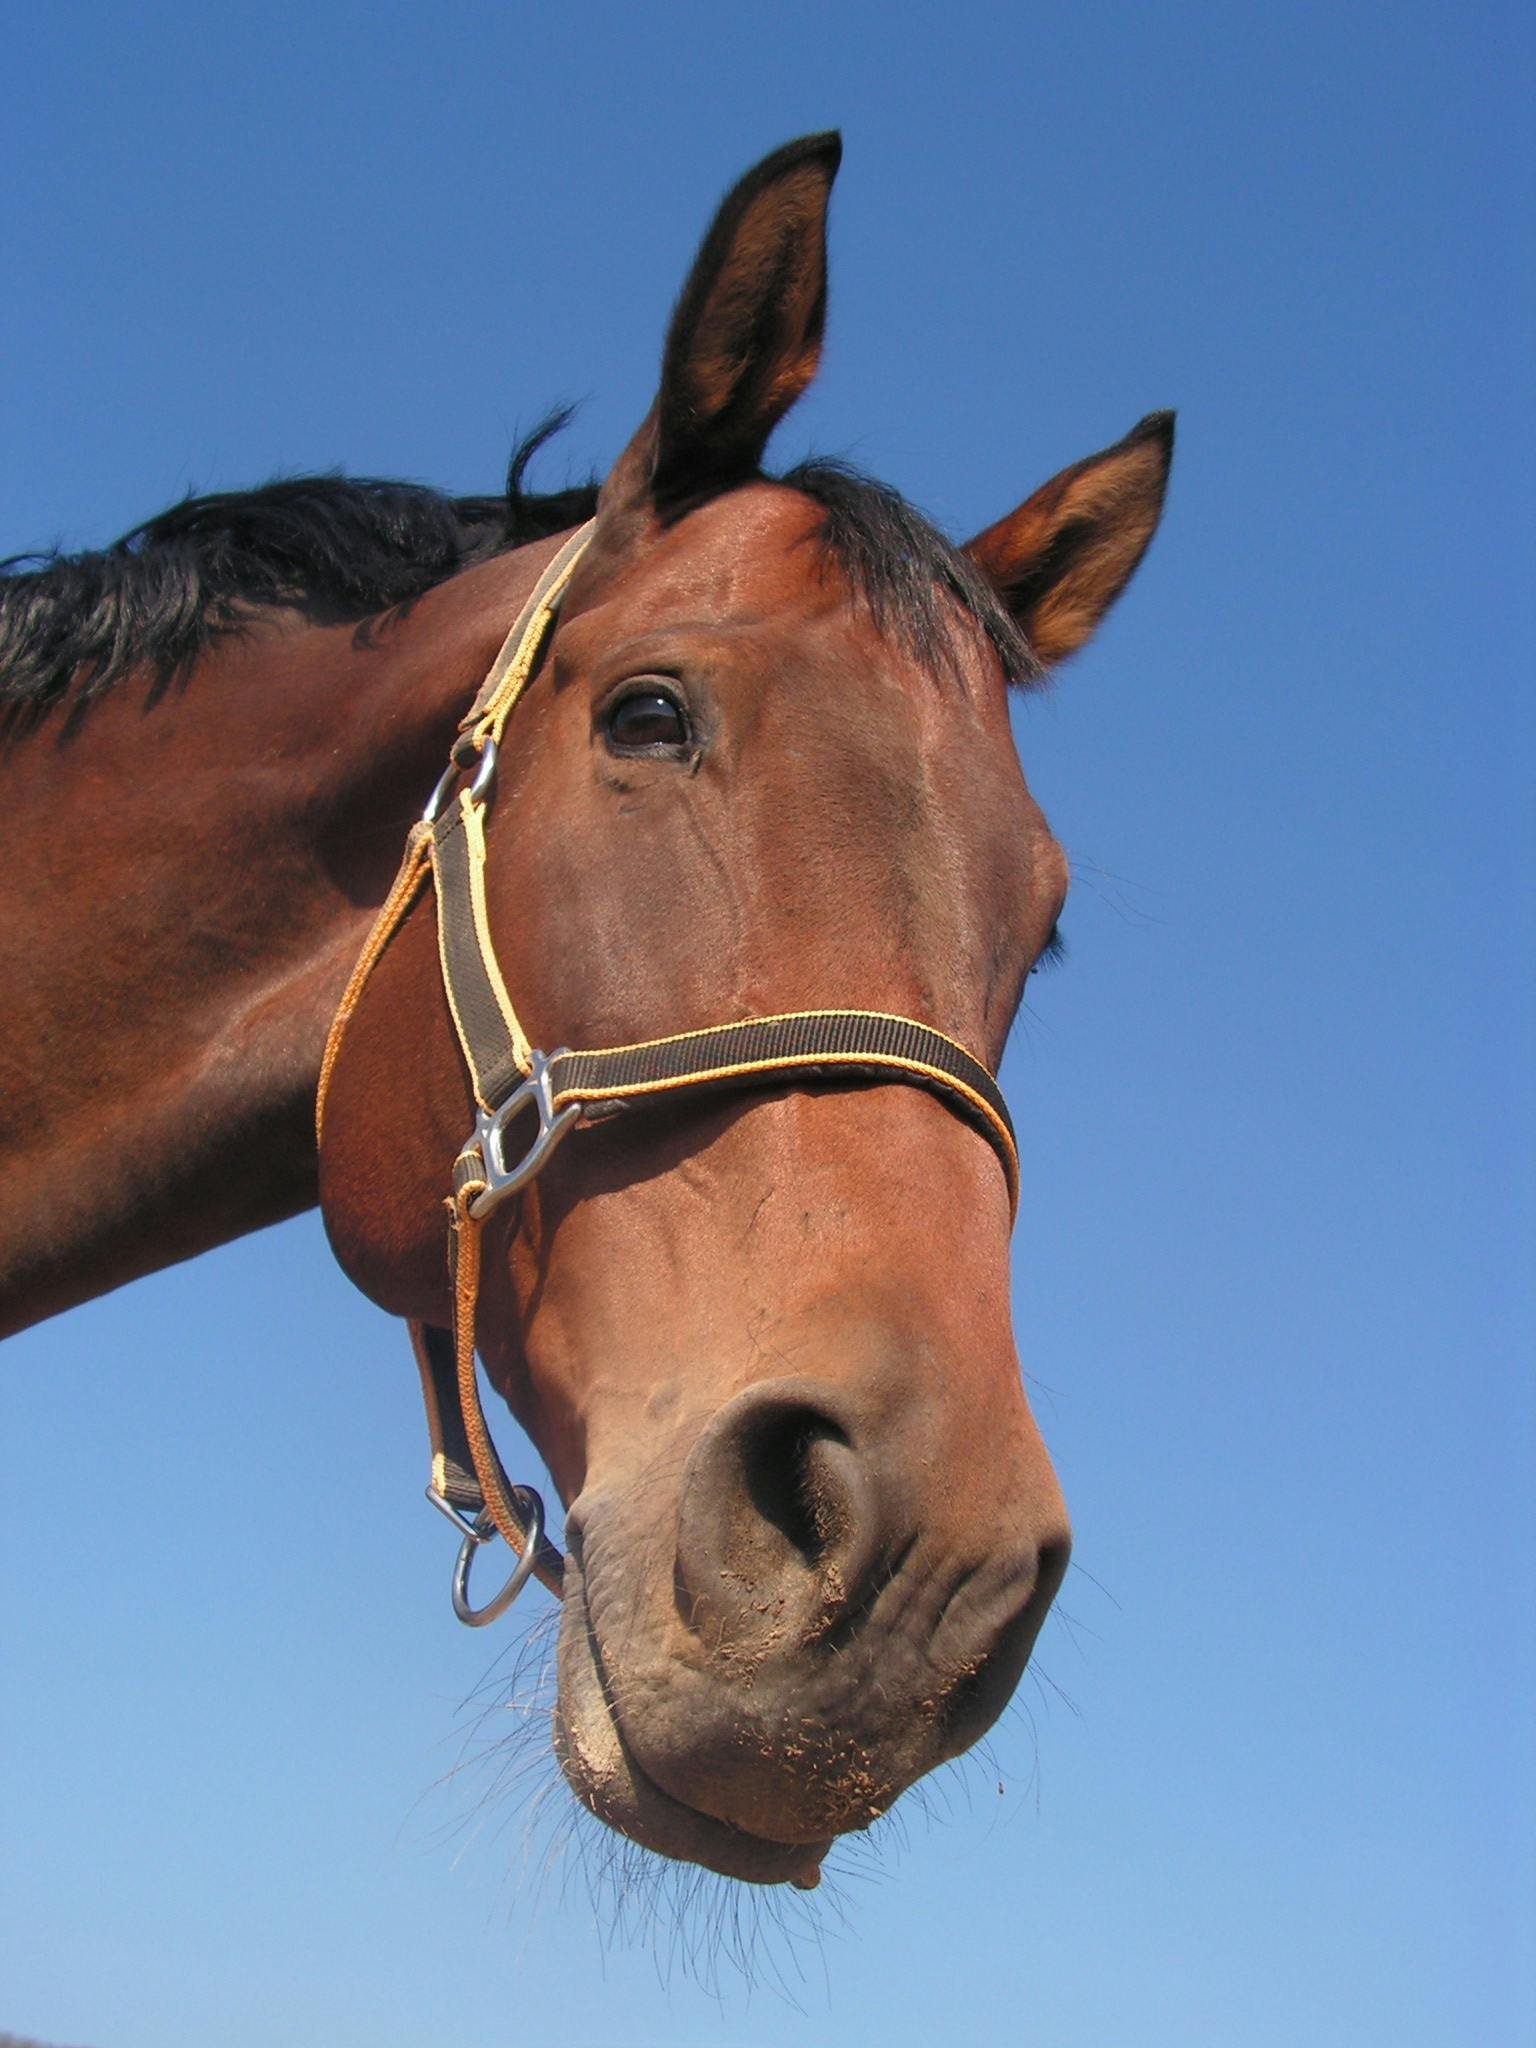 A horse in an animal communication session